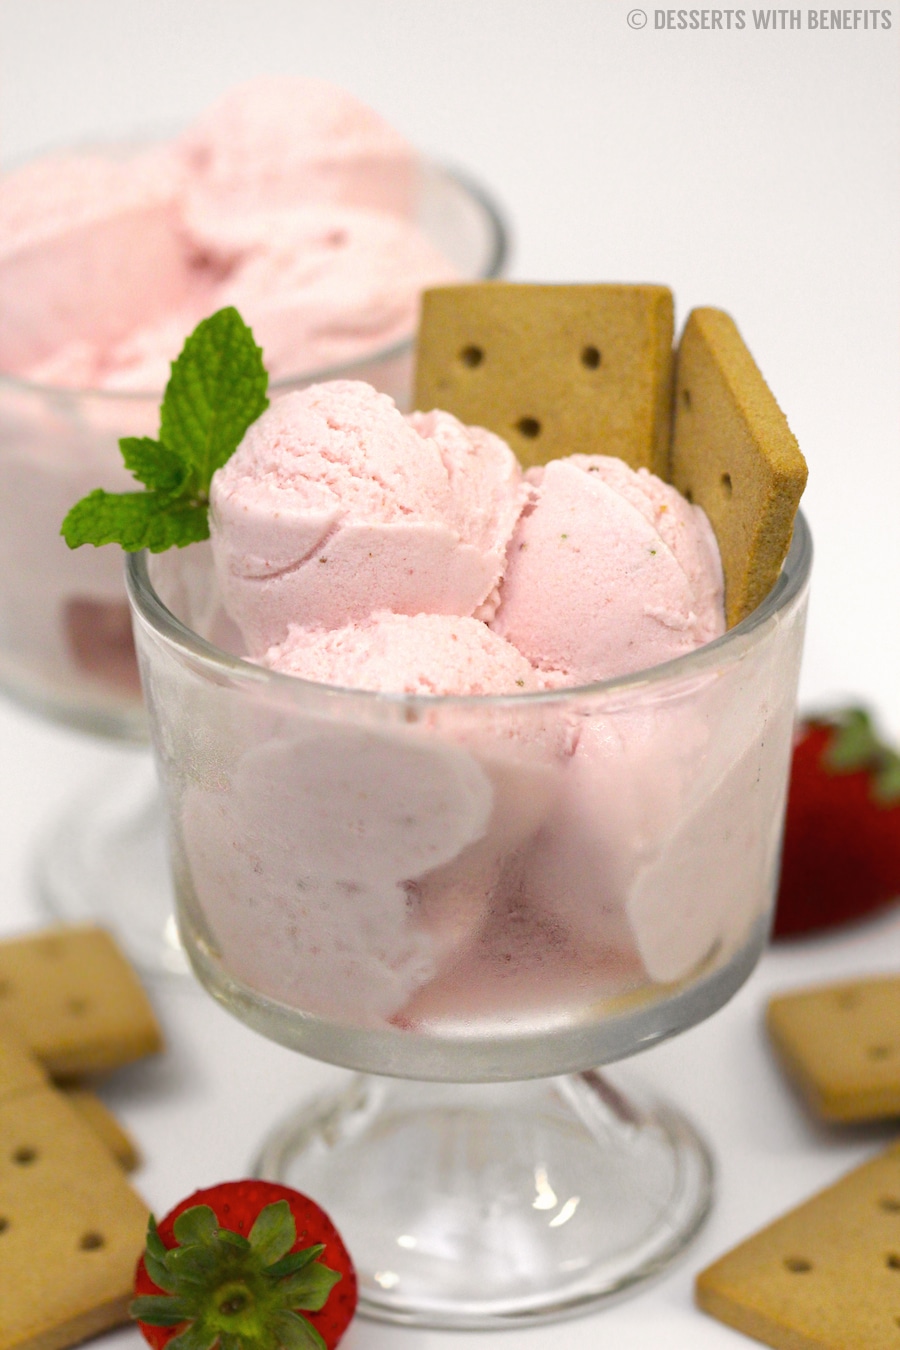 Healthy Strawberries and Cream Ice Cream (sugar free, low fat, low carb, high protein) - Desserts with Benefits